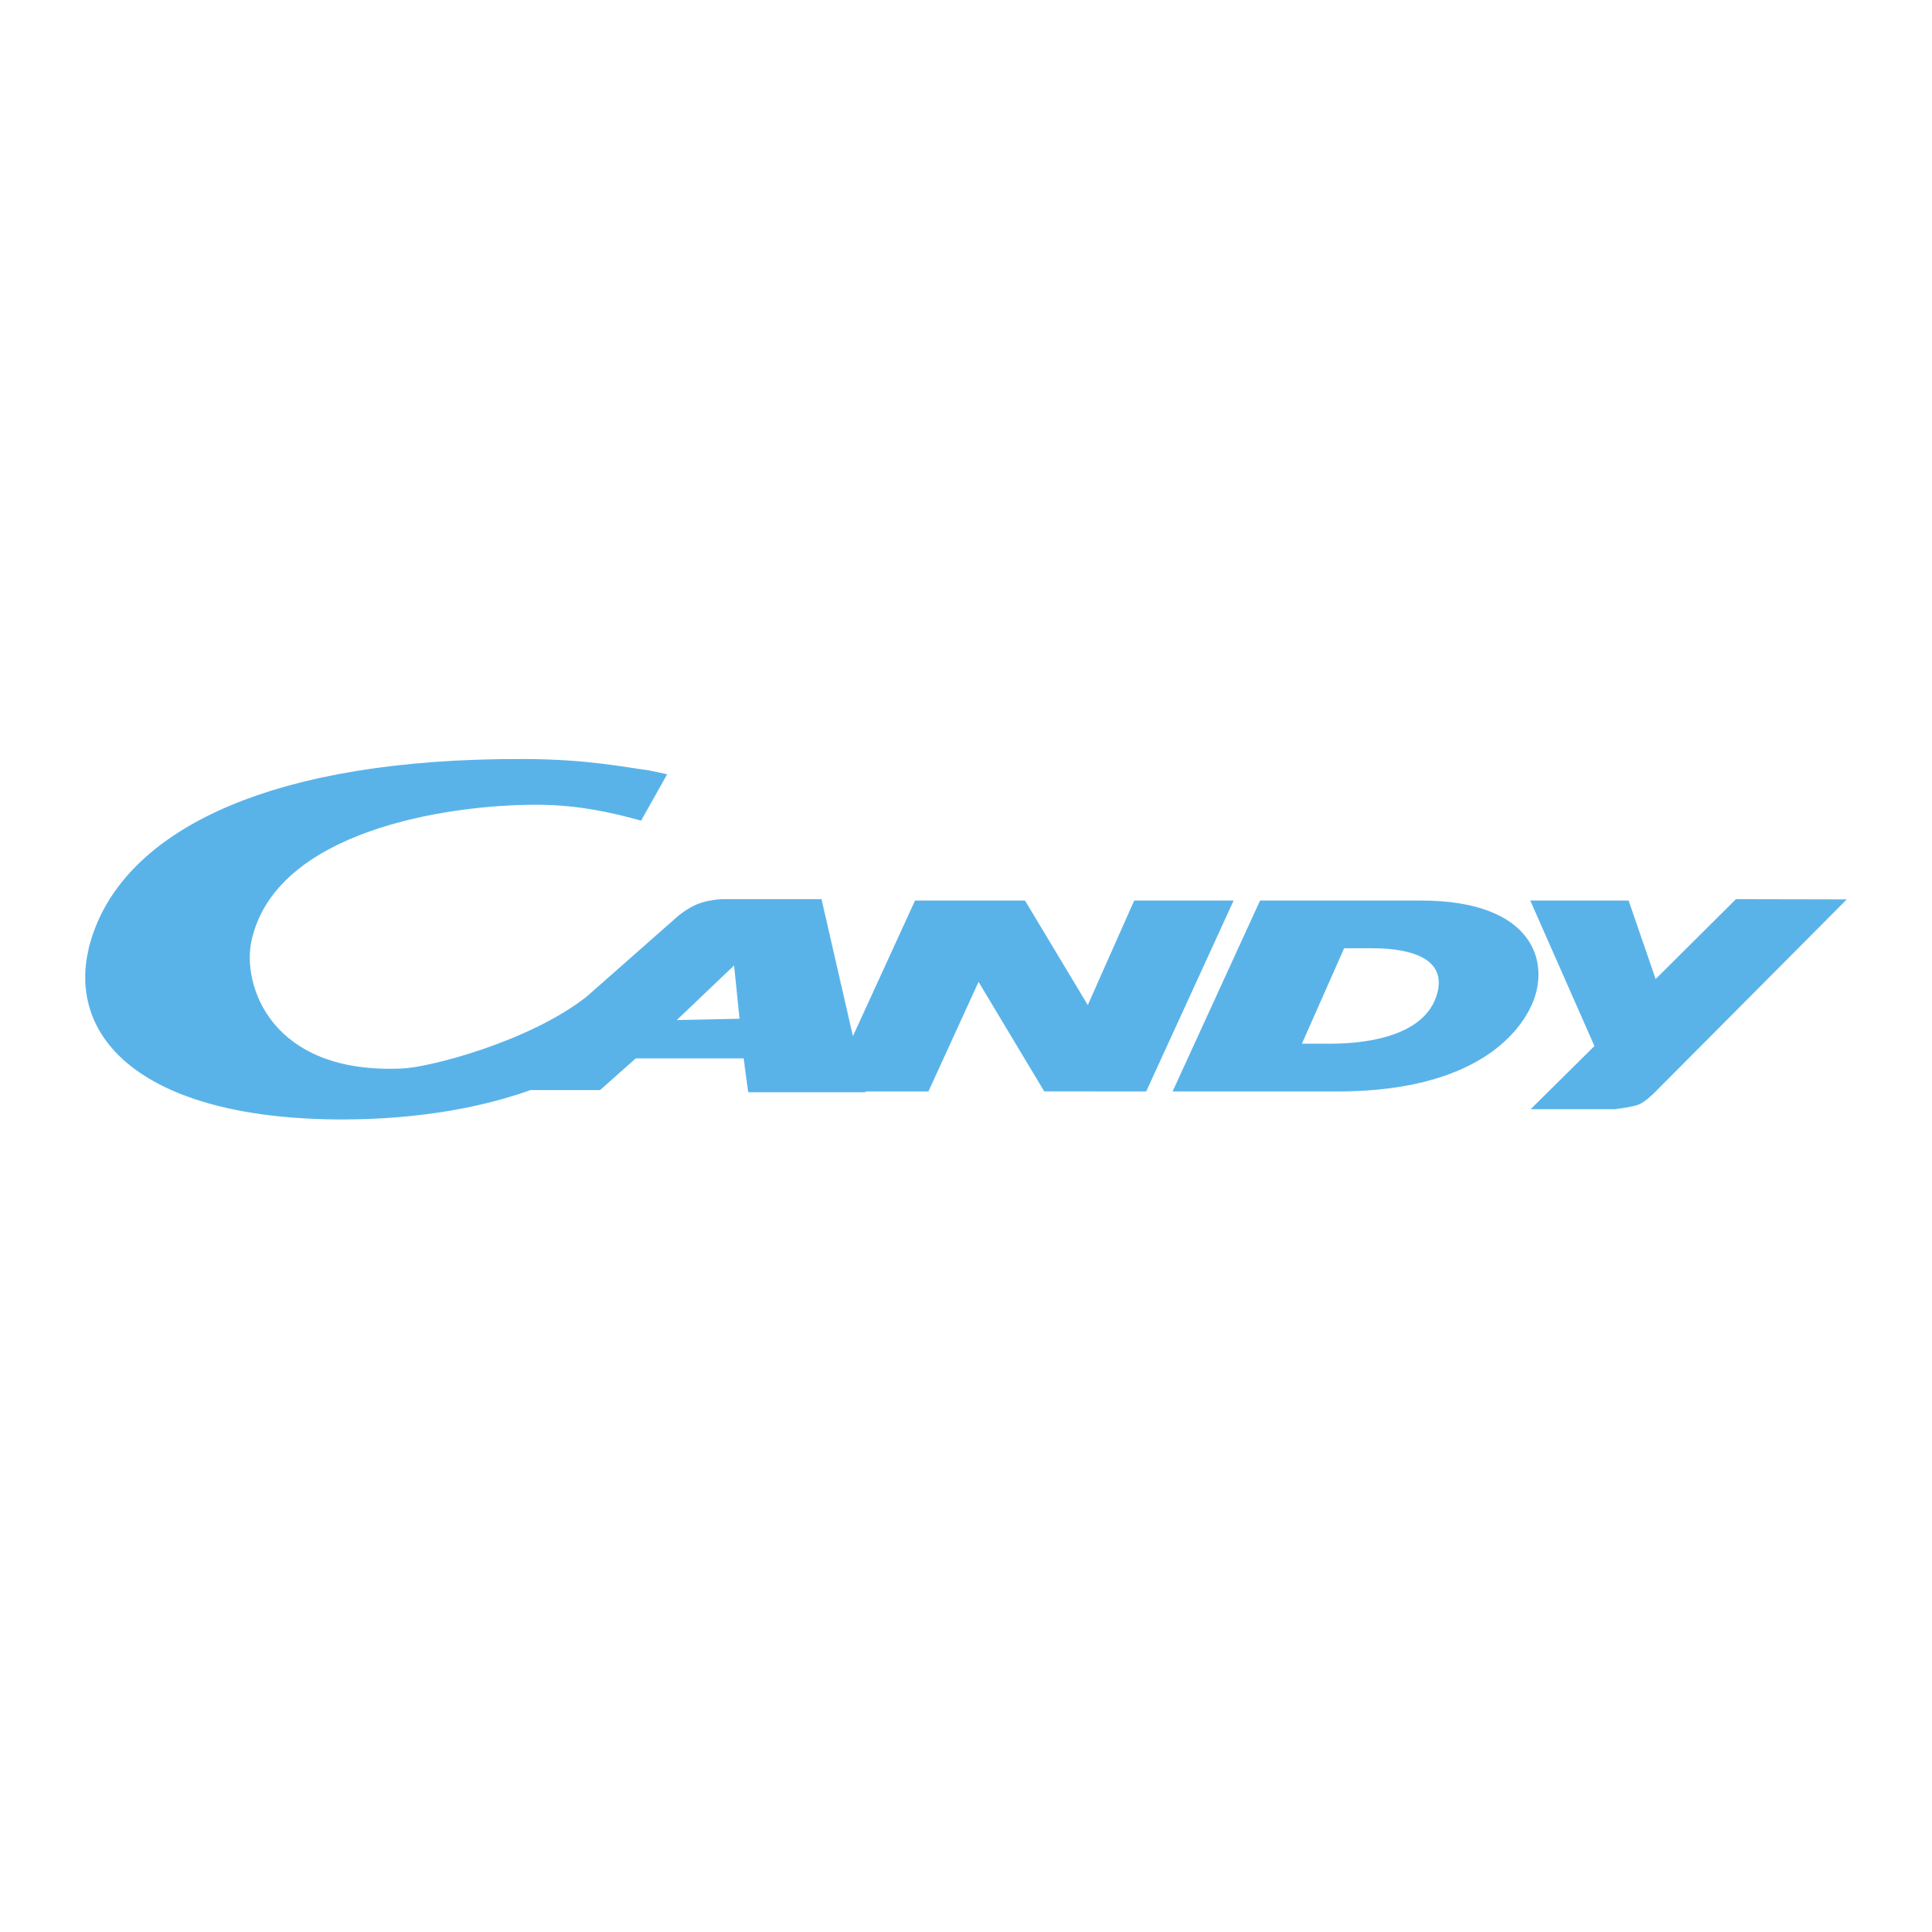 Candy Logo - Candy Logo PNG Transparent & SVG Vector - Freebie Supply